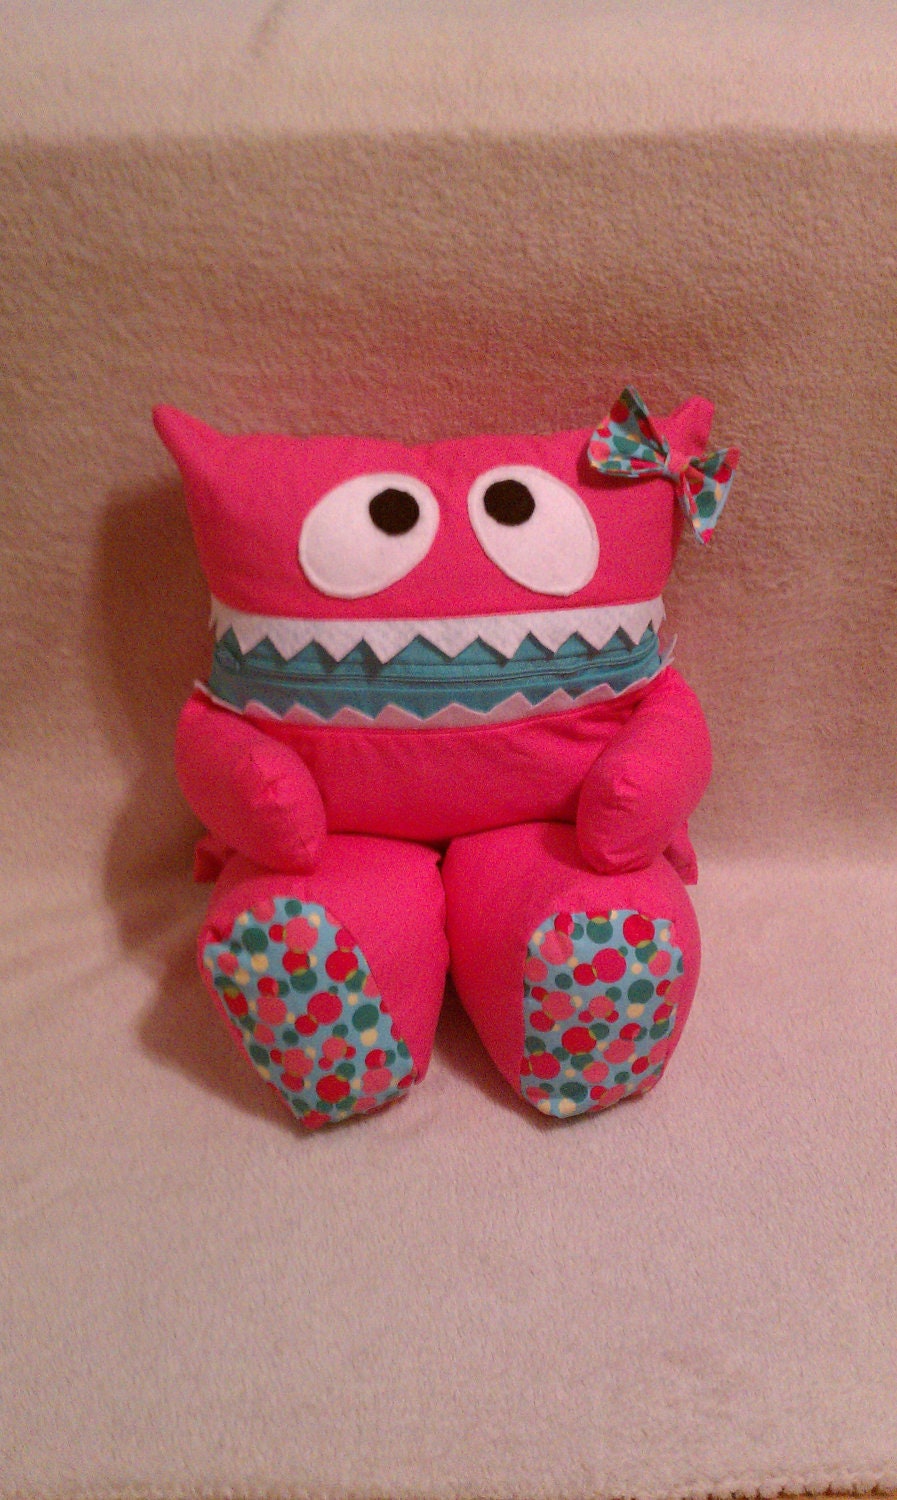 Hot Pink Pajama Eater Pillow Pal Monster with Teal Polka Dot Feet and Bow